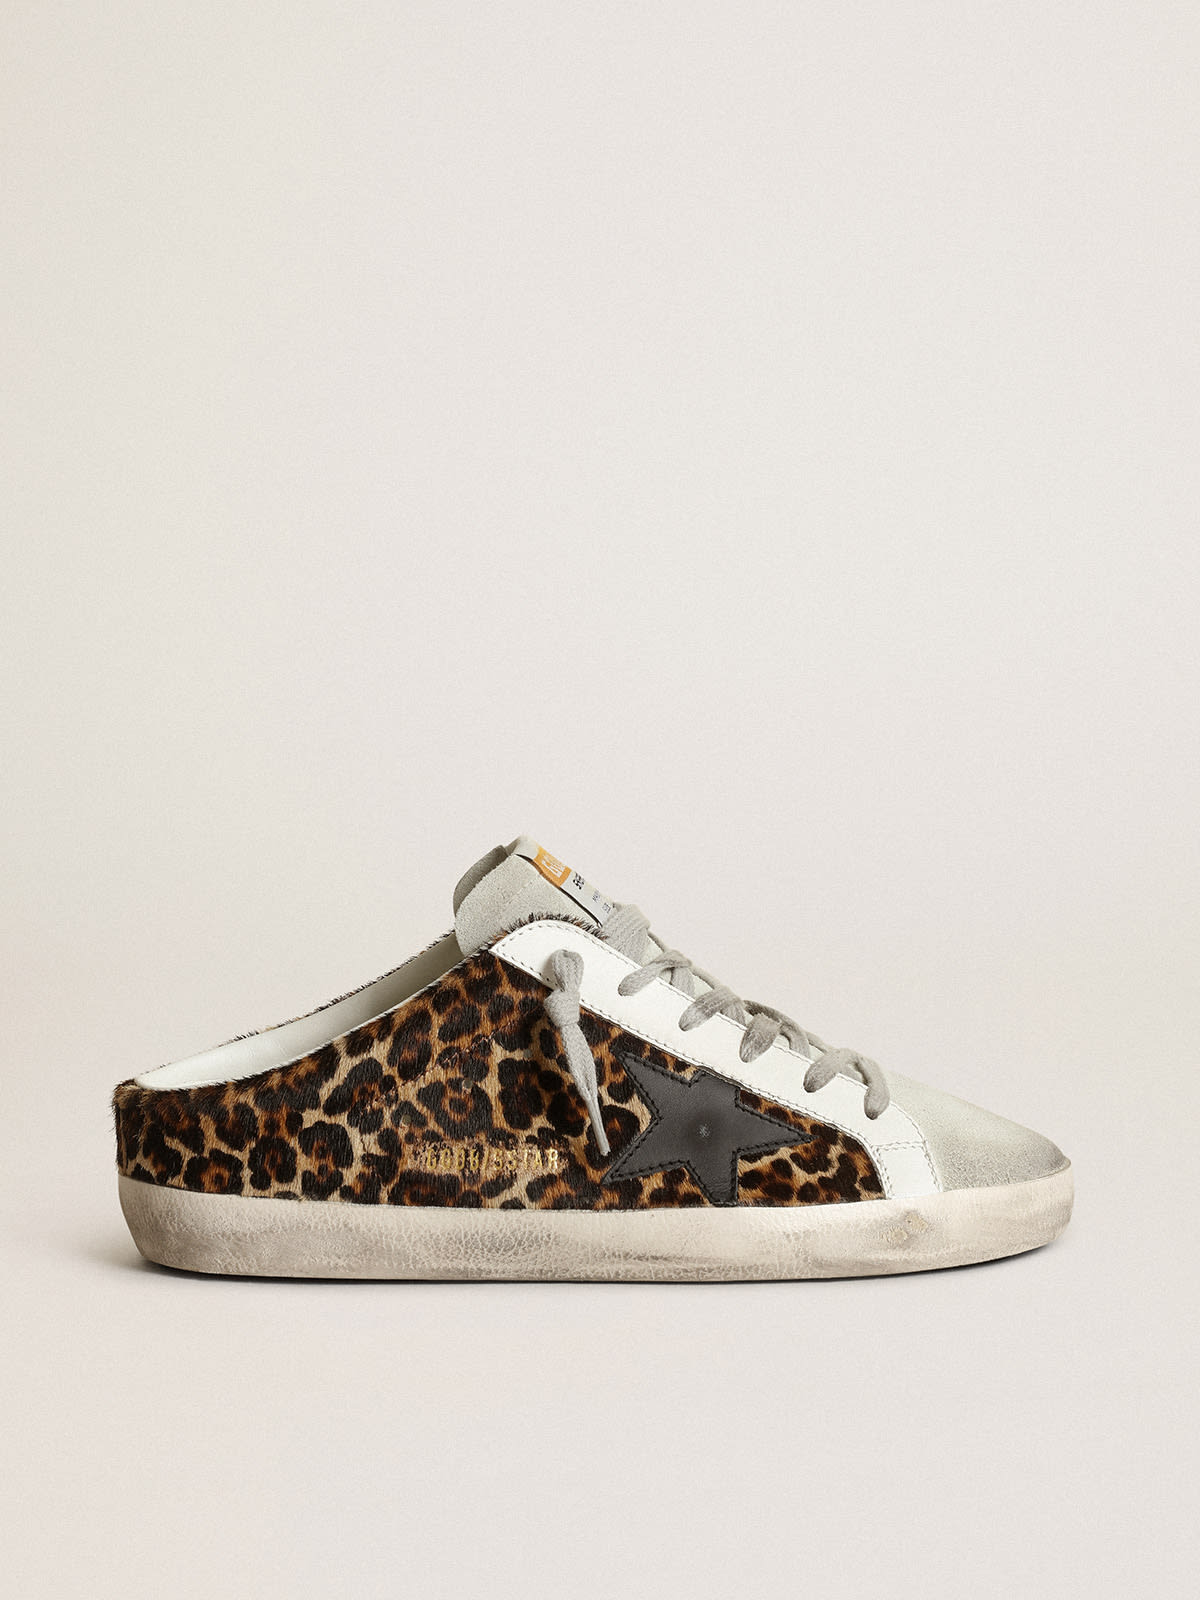 Golden Goose - Super-Star Sabots in leopard-print pony skin with black leather star and ice-gray suede tongue in 